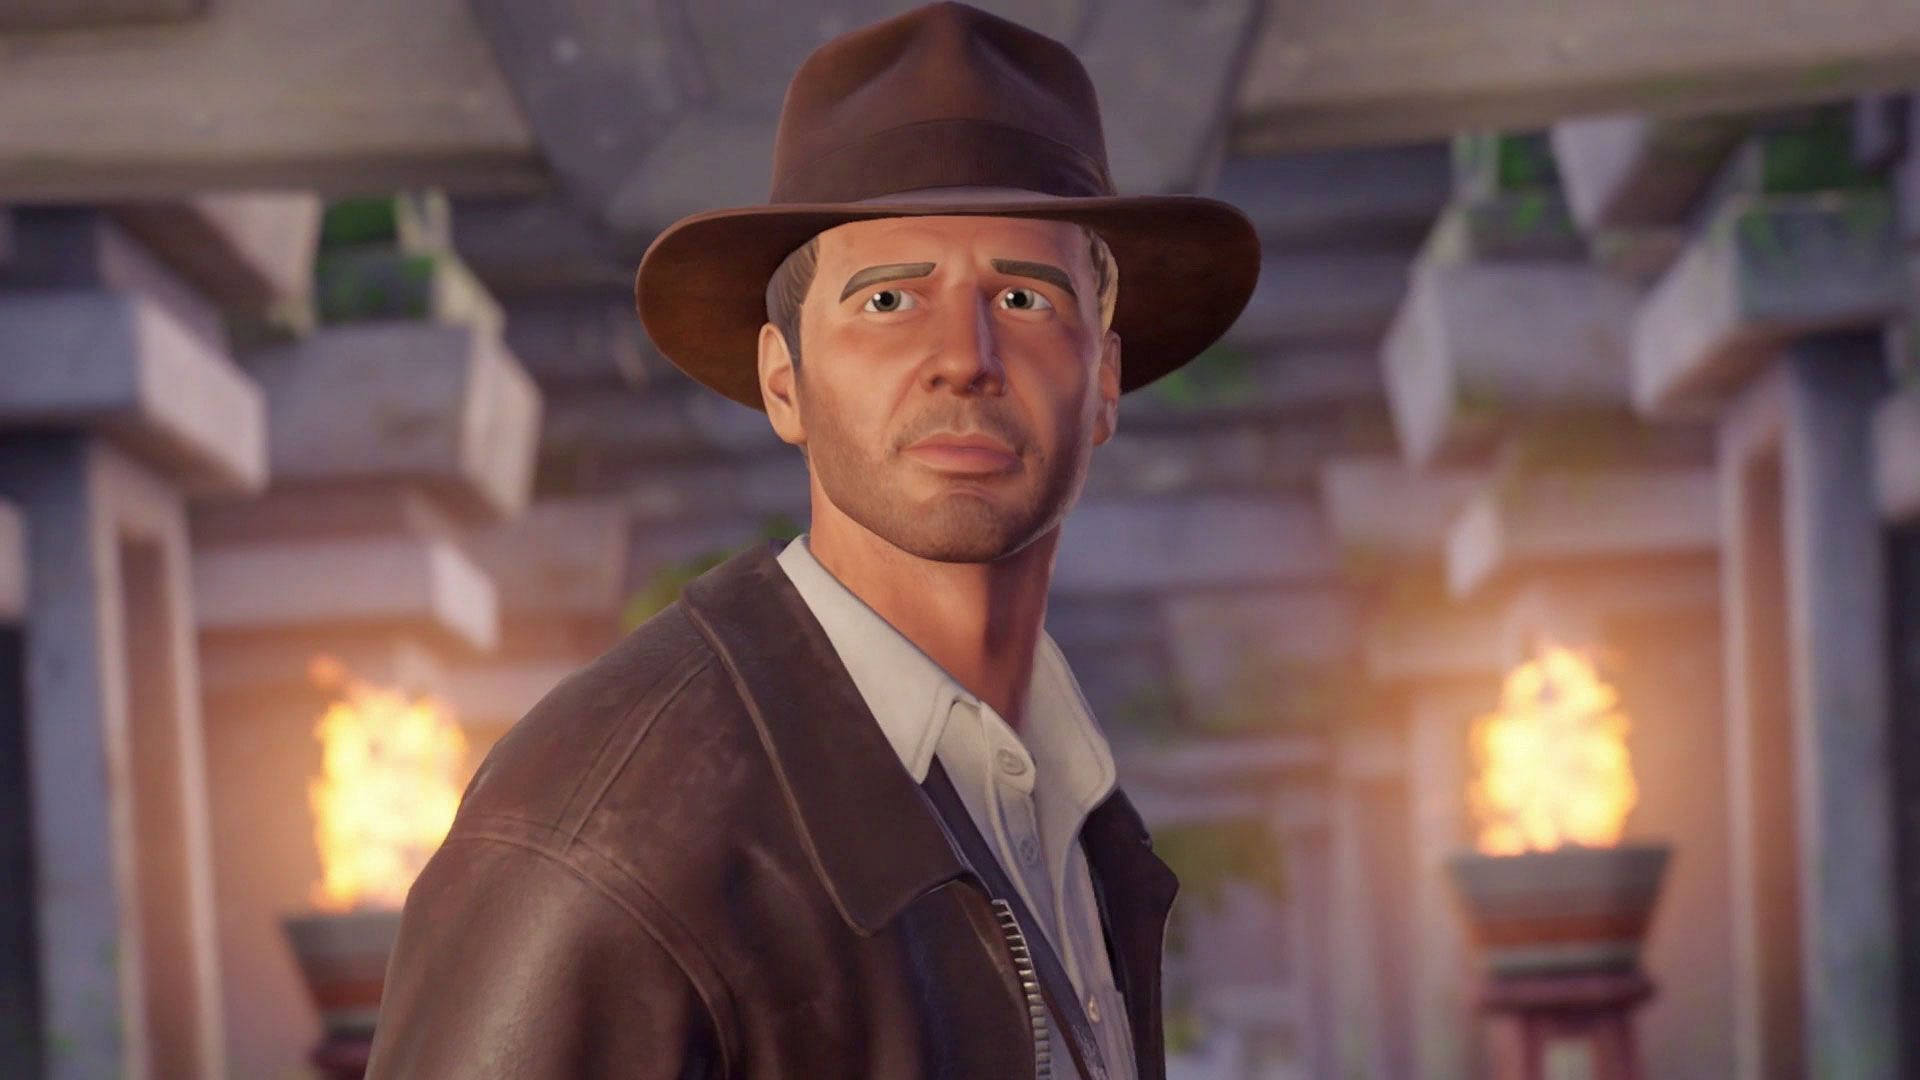 Indiana Jones is coming with the next Fortnite update (Image via Epic Games)